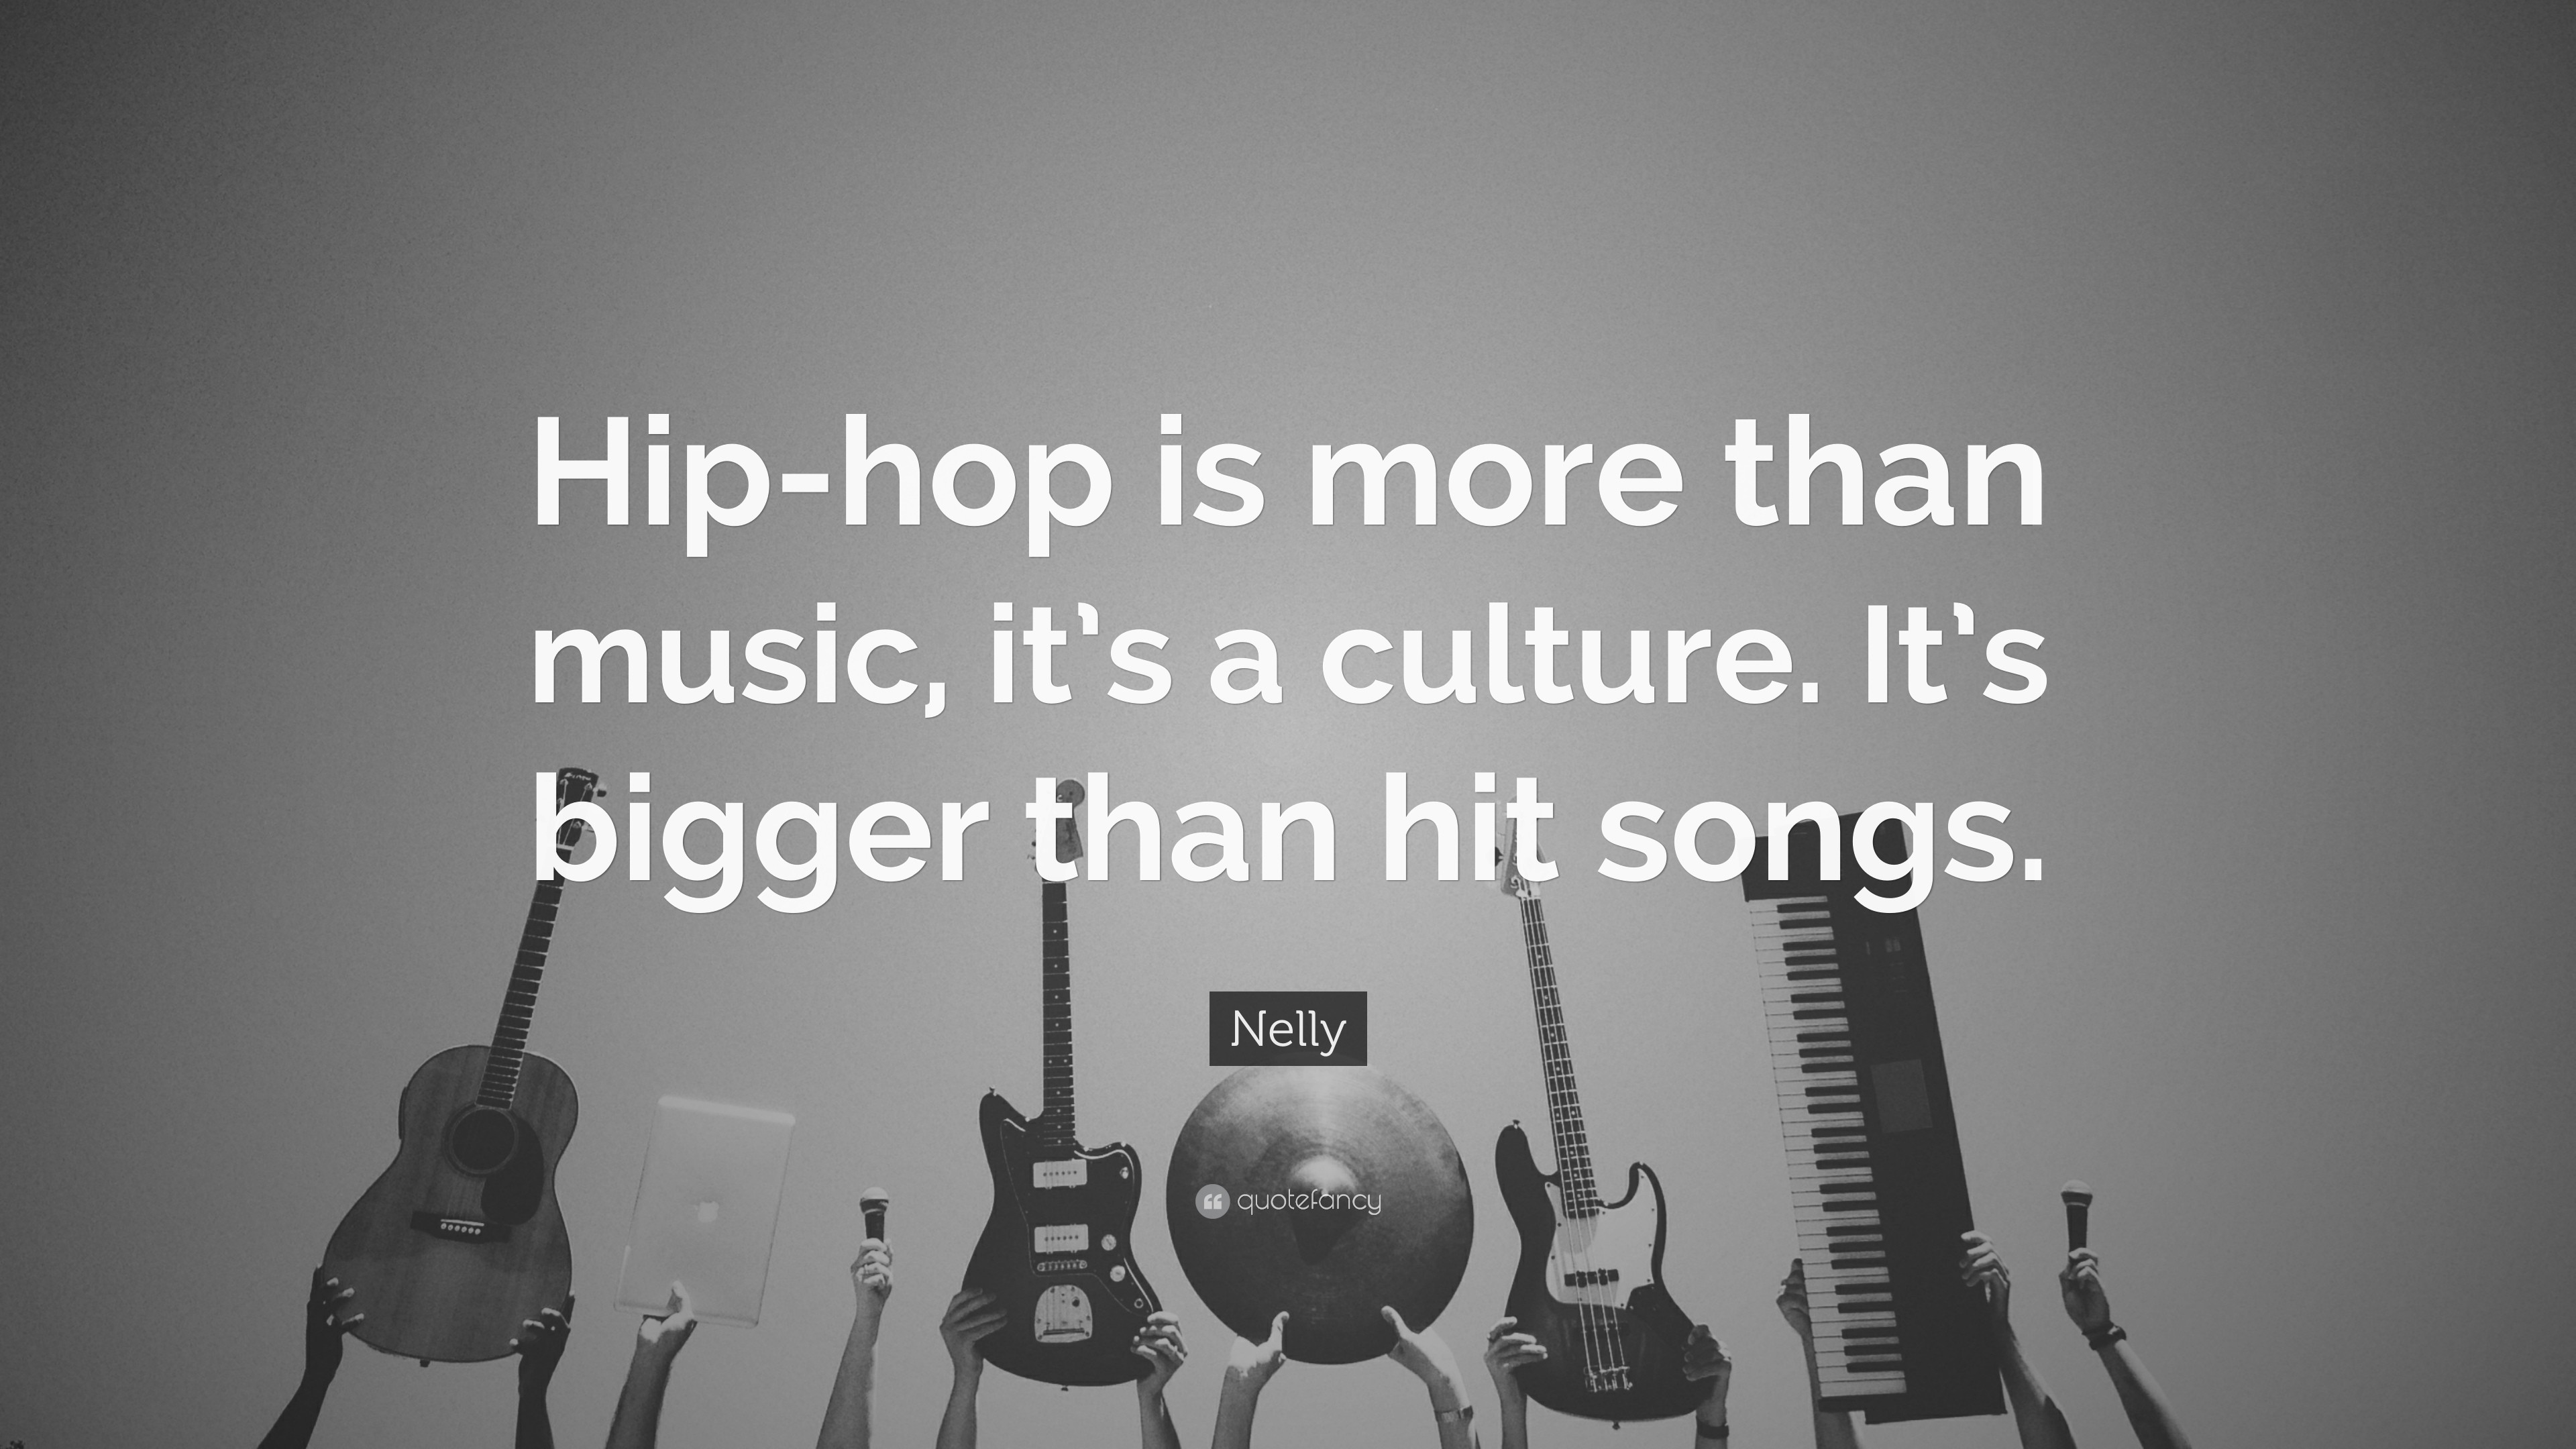 3840x2160 Nelly Quote: “Hip-hop is more than music, it's a culture.